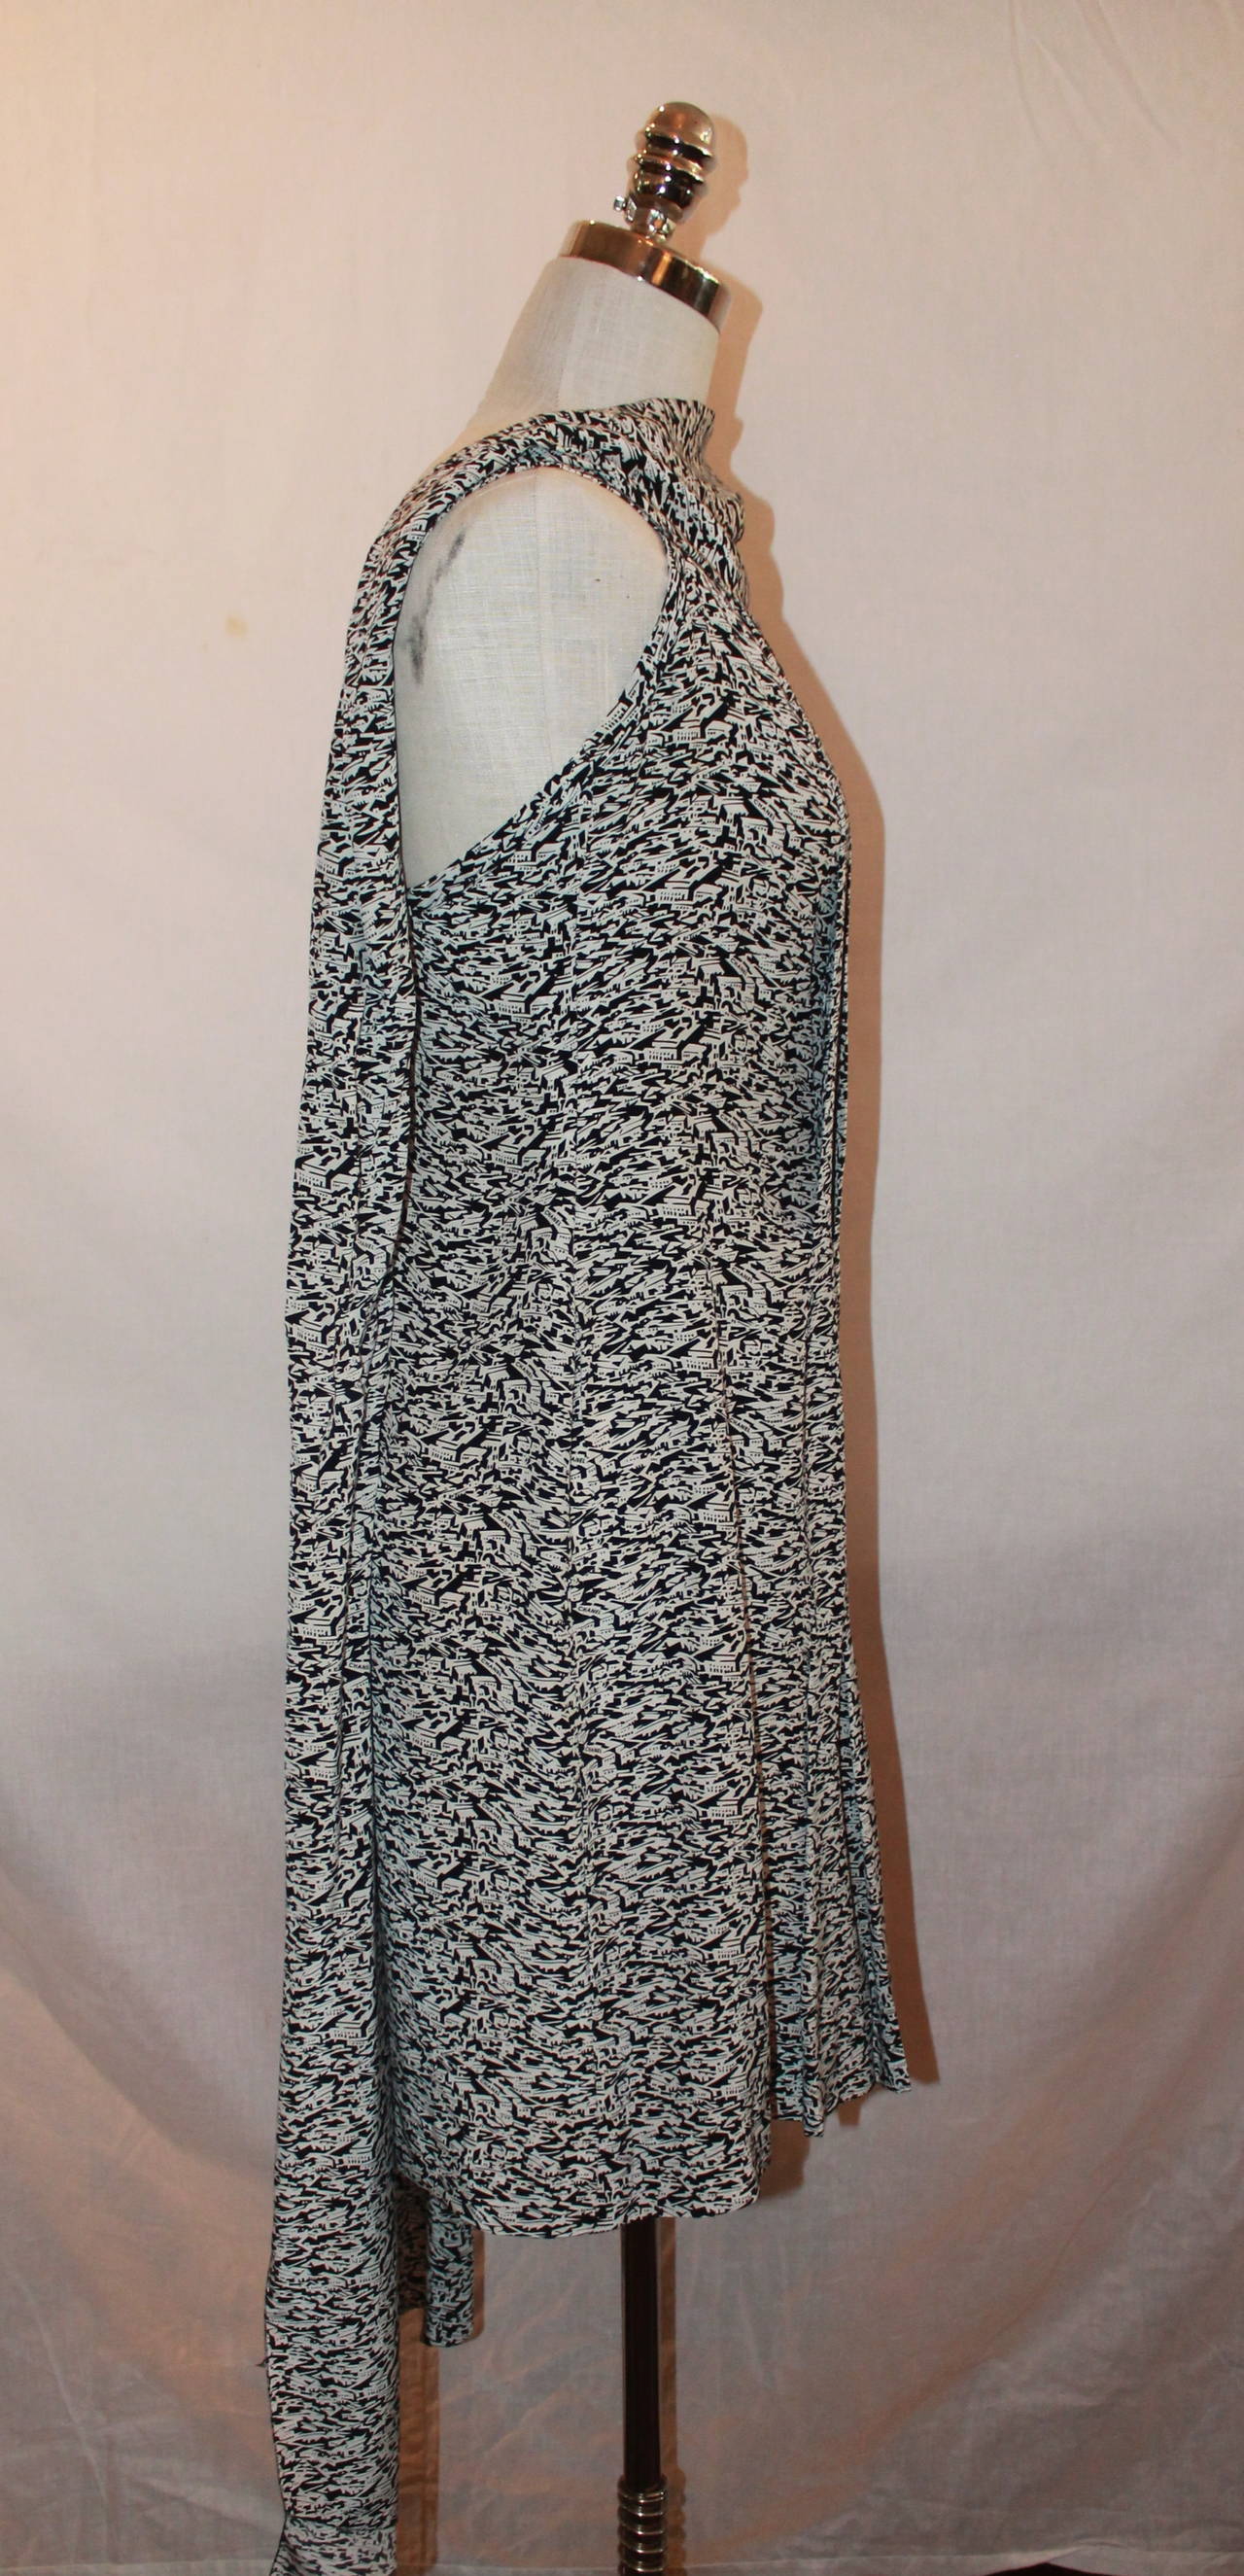 Chanel Black & White Printed Shawl Dress- 40. This dress is in excellent condition and has a print with geometric buildings. It is pleated with a shawl attached.

Measurements:
Bust- 34